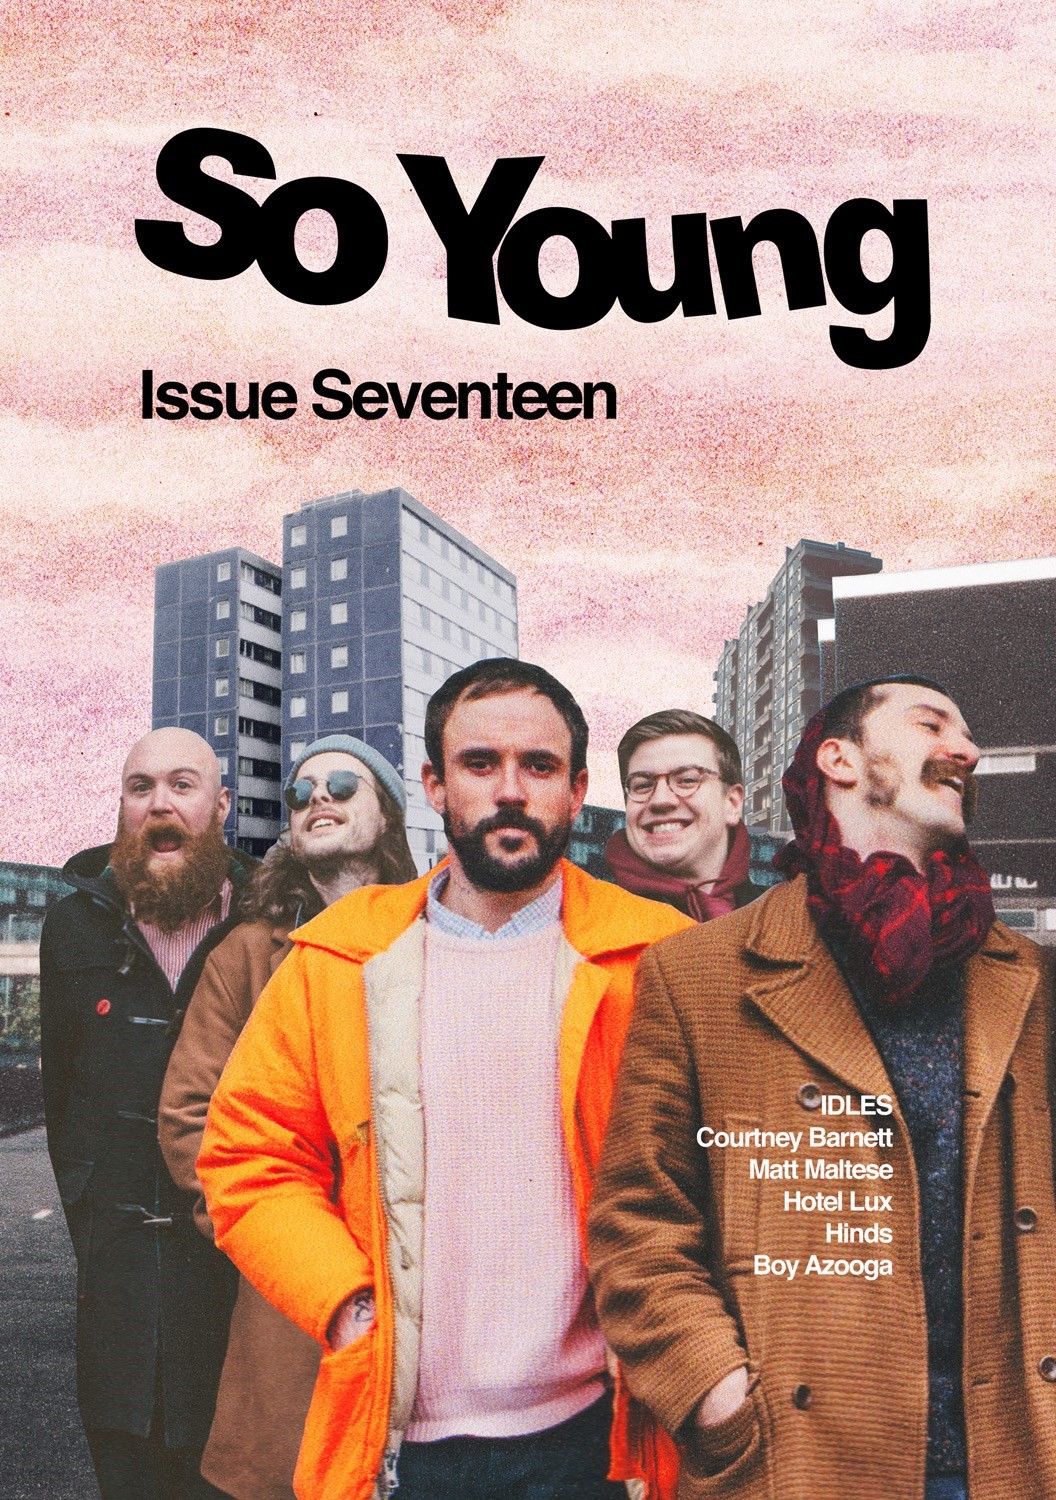 So Young Magazine - Glasgow's Comfort Share New Single 'My Bias' via Fat  Cat Records - A fully illustrated new music magazine